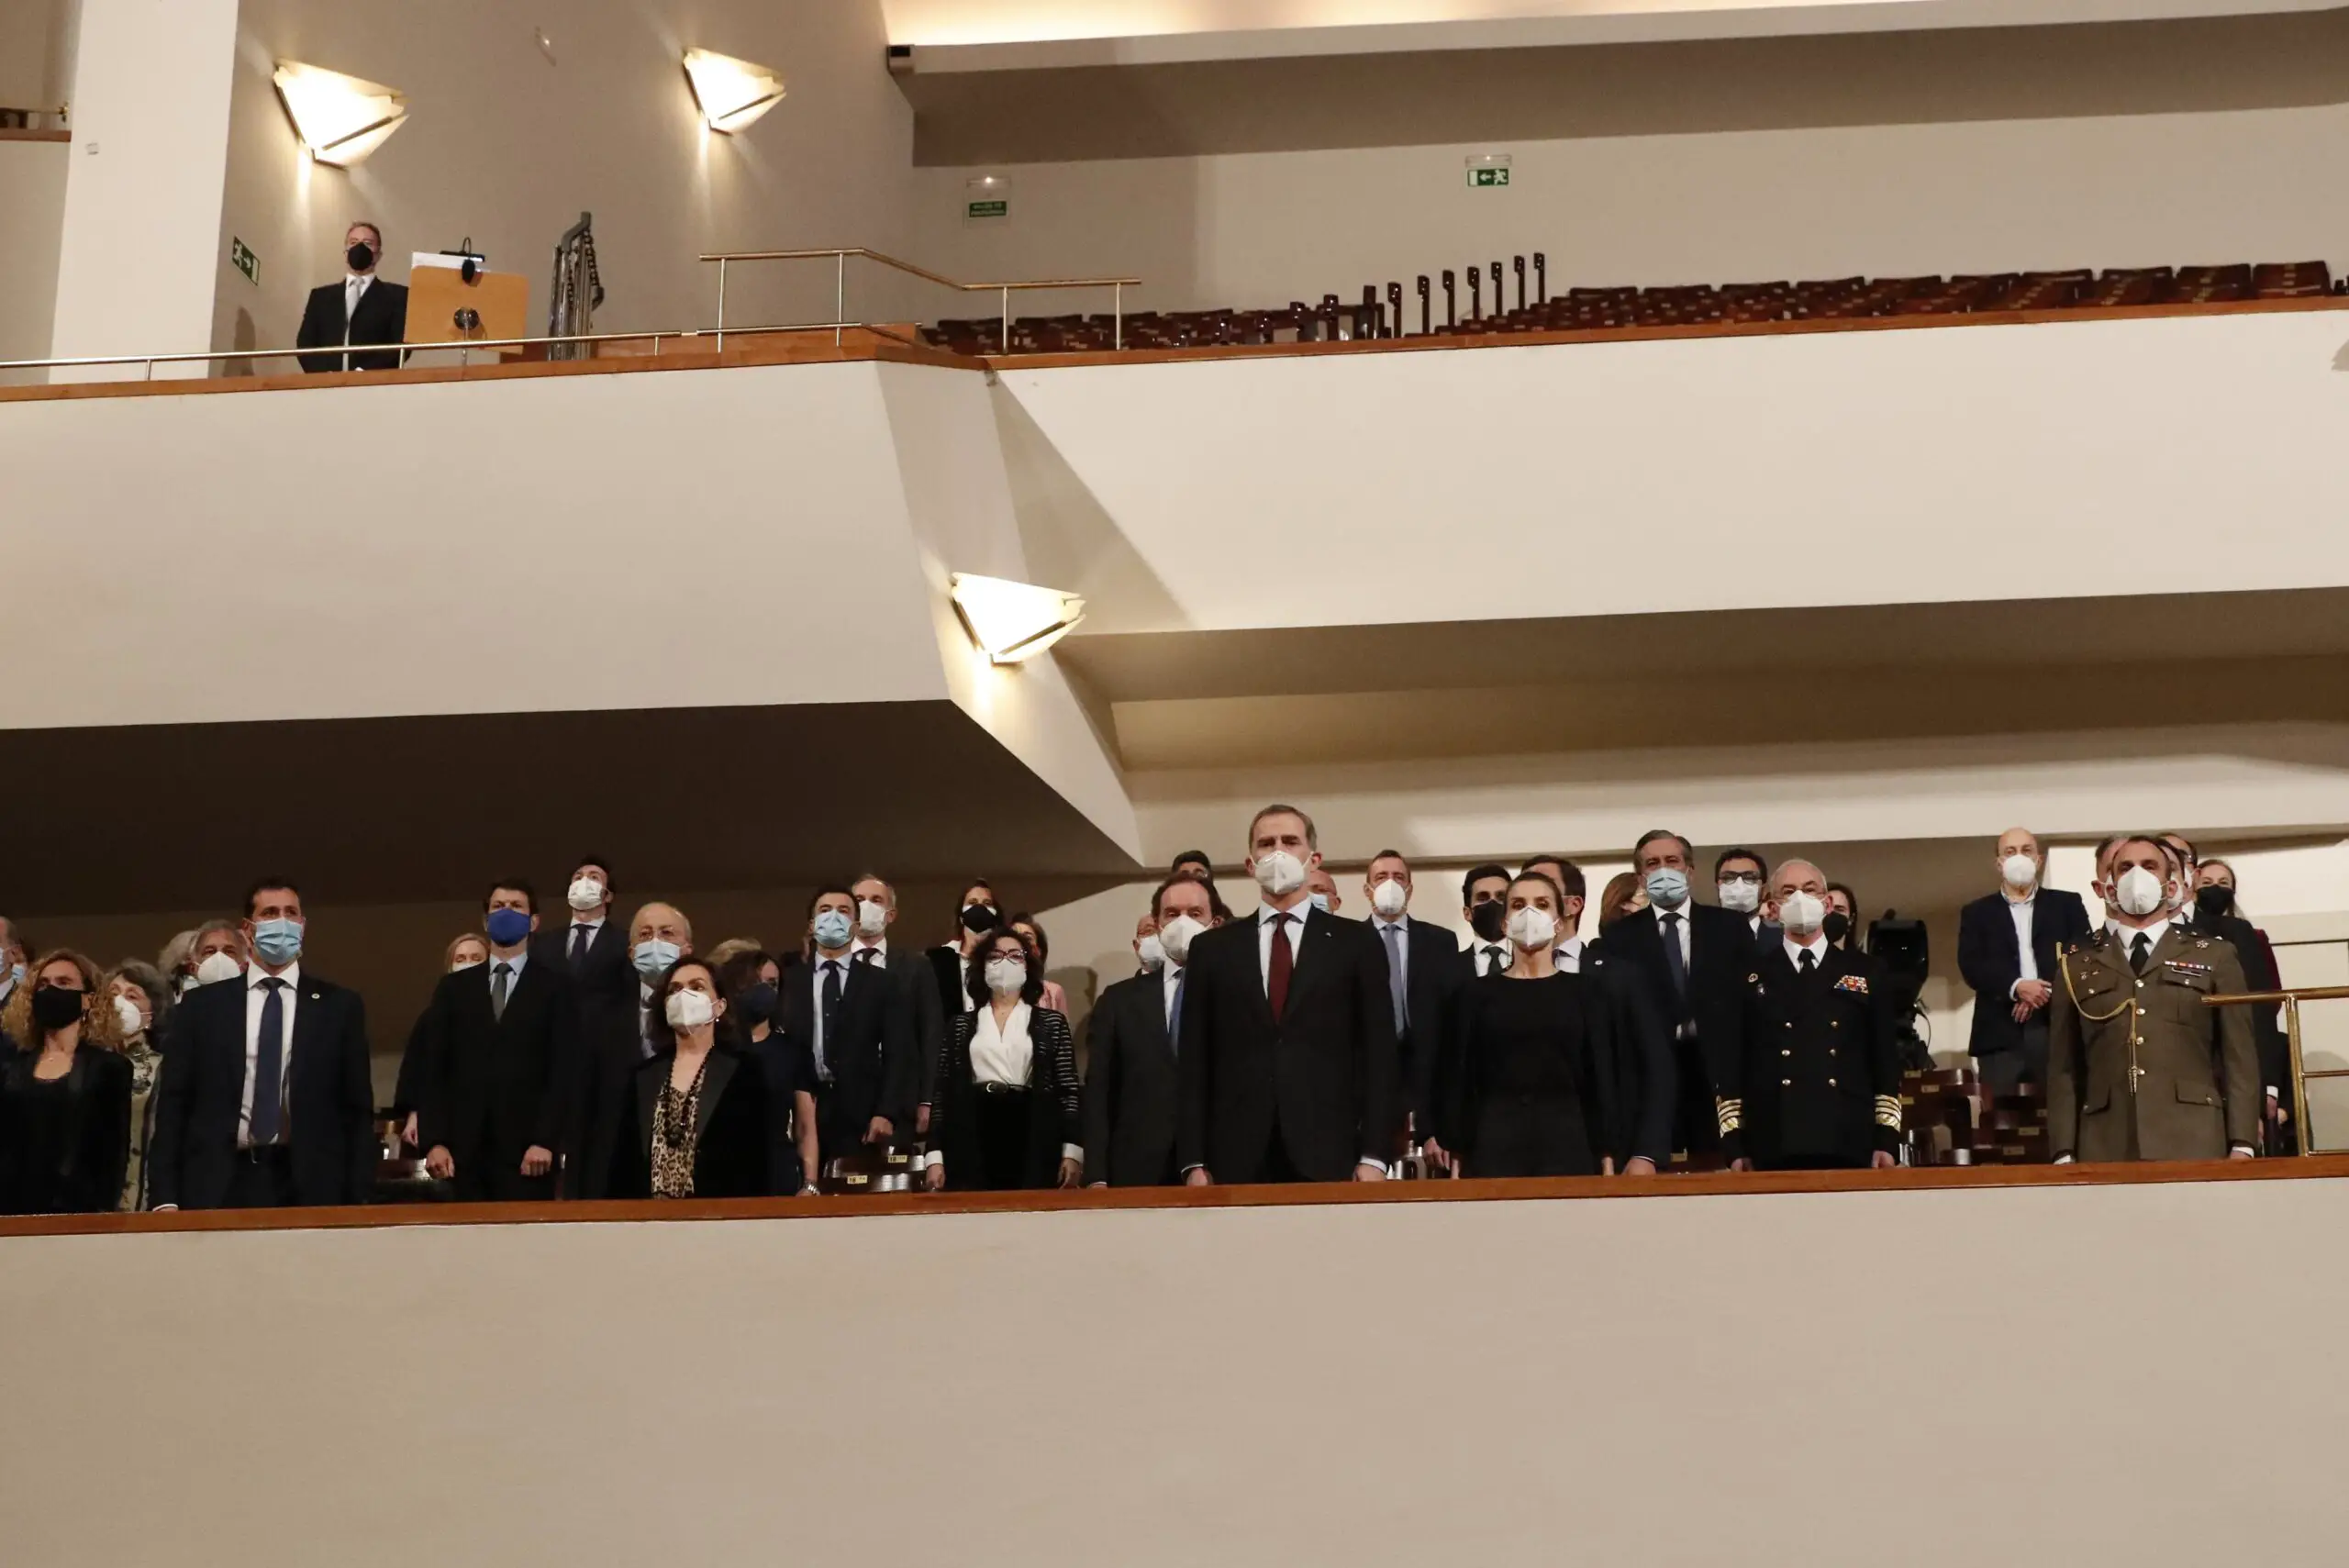 At the end of the concert, Felipe and Letizia met with the representatives of the Symphony Orchestra, the Spanish Radio Television Choir, and the soloists